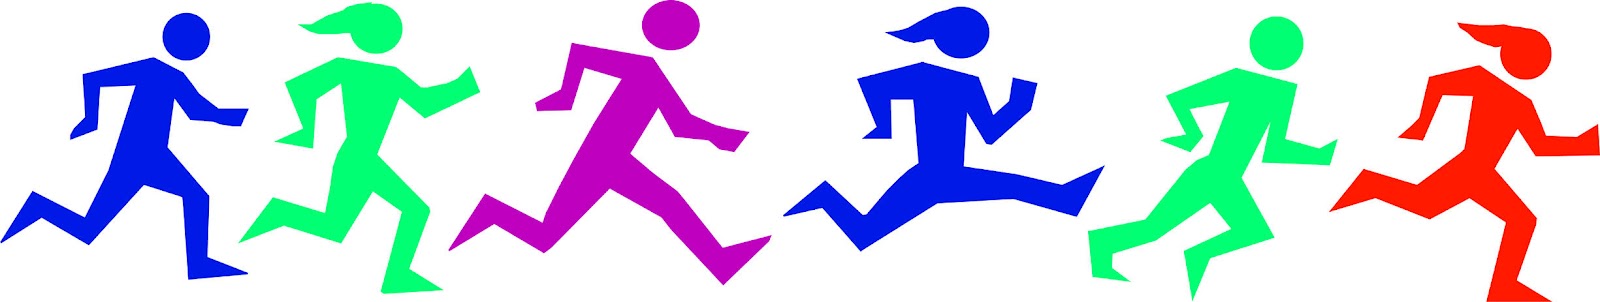 clipart running images - photo #22